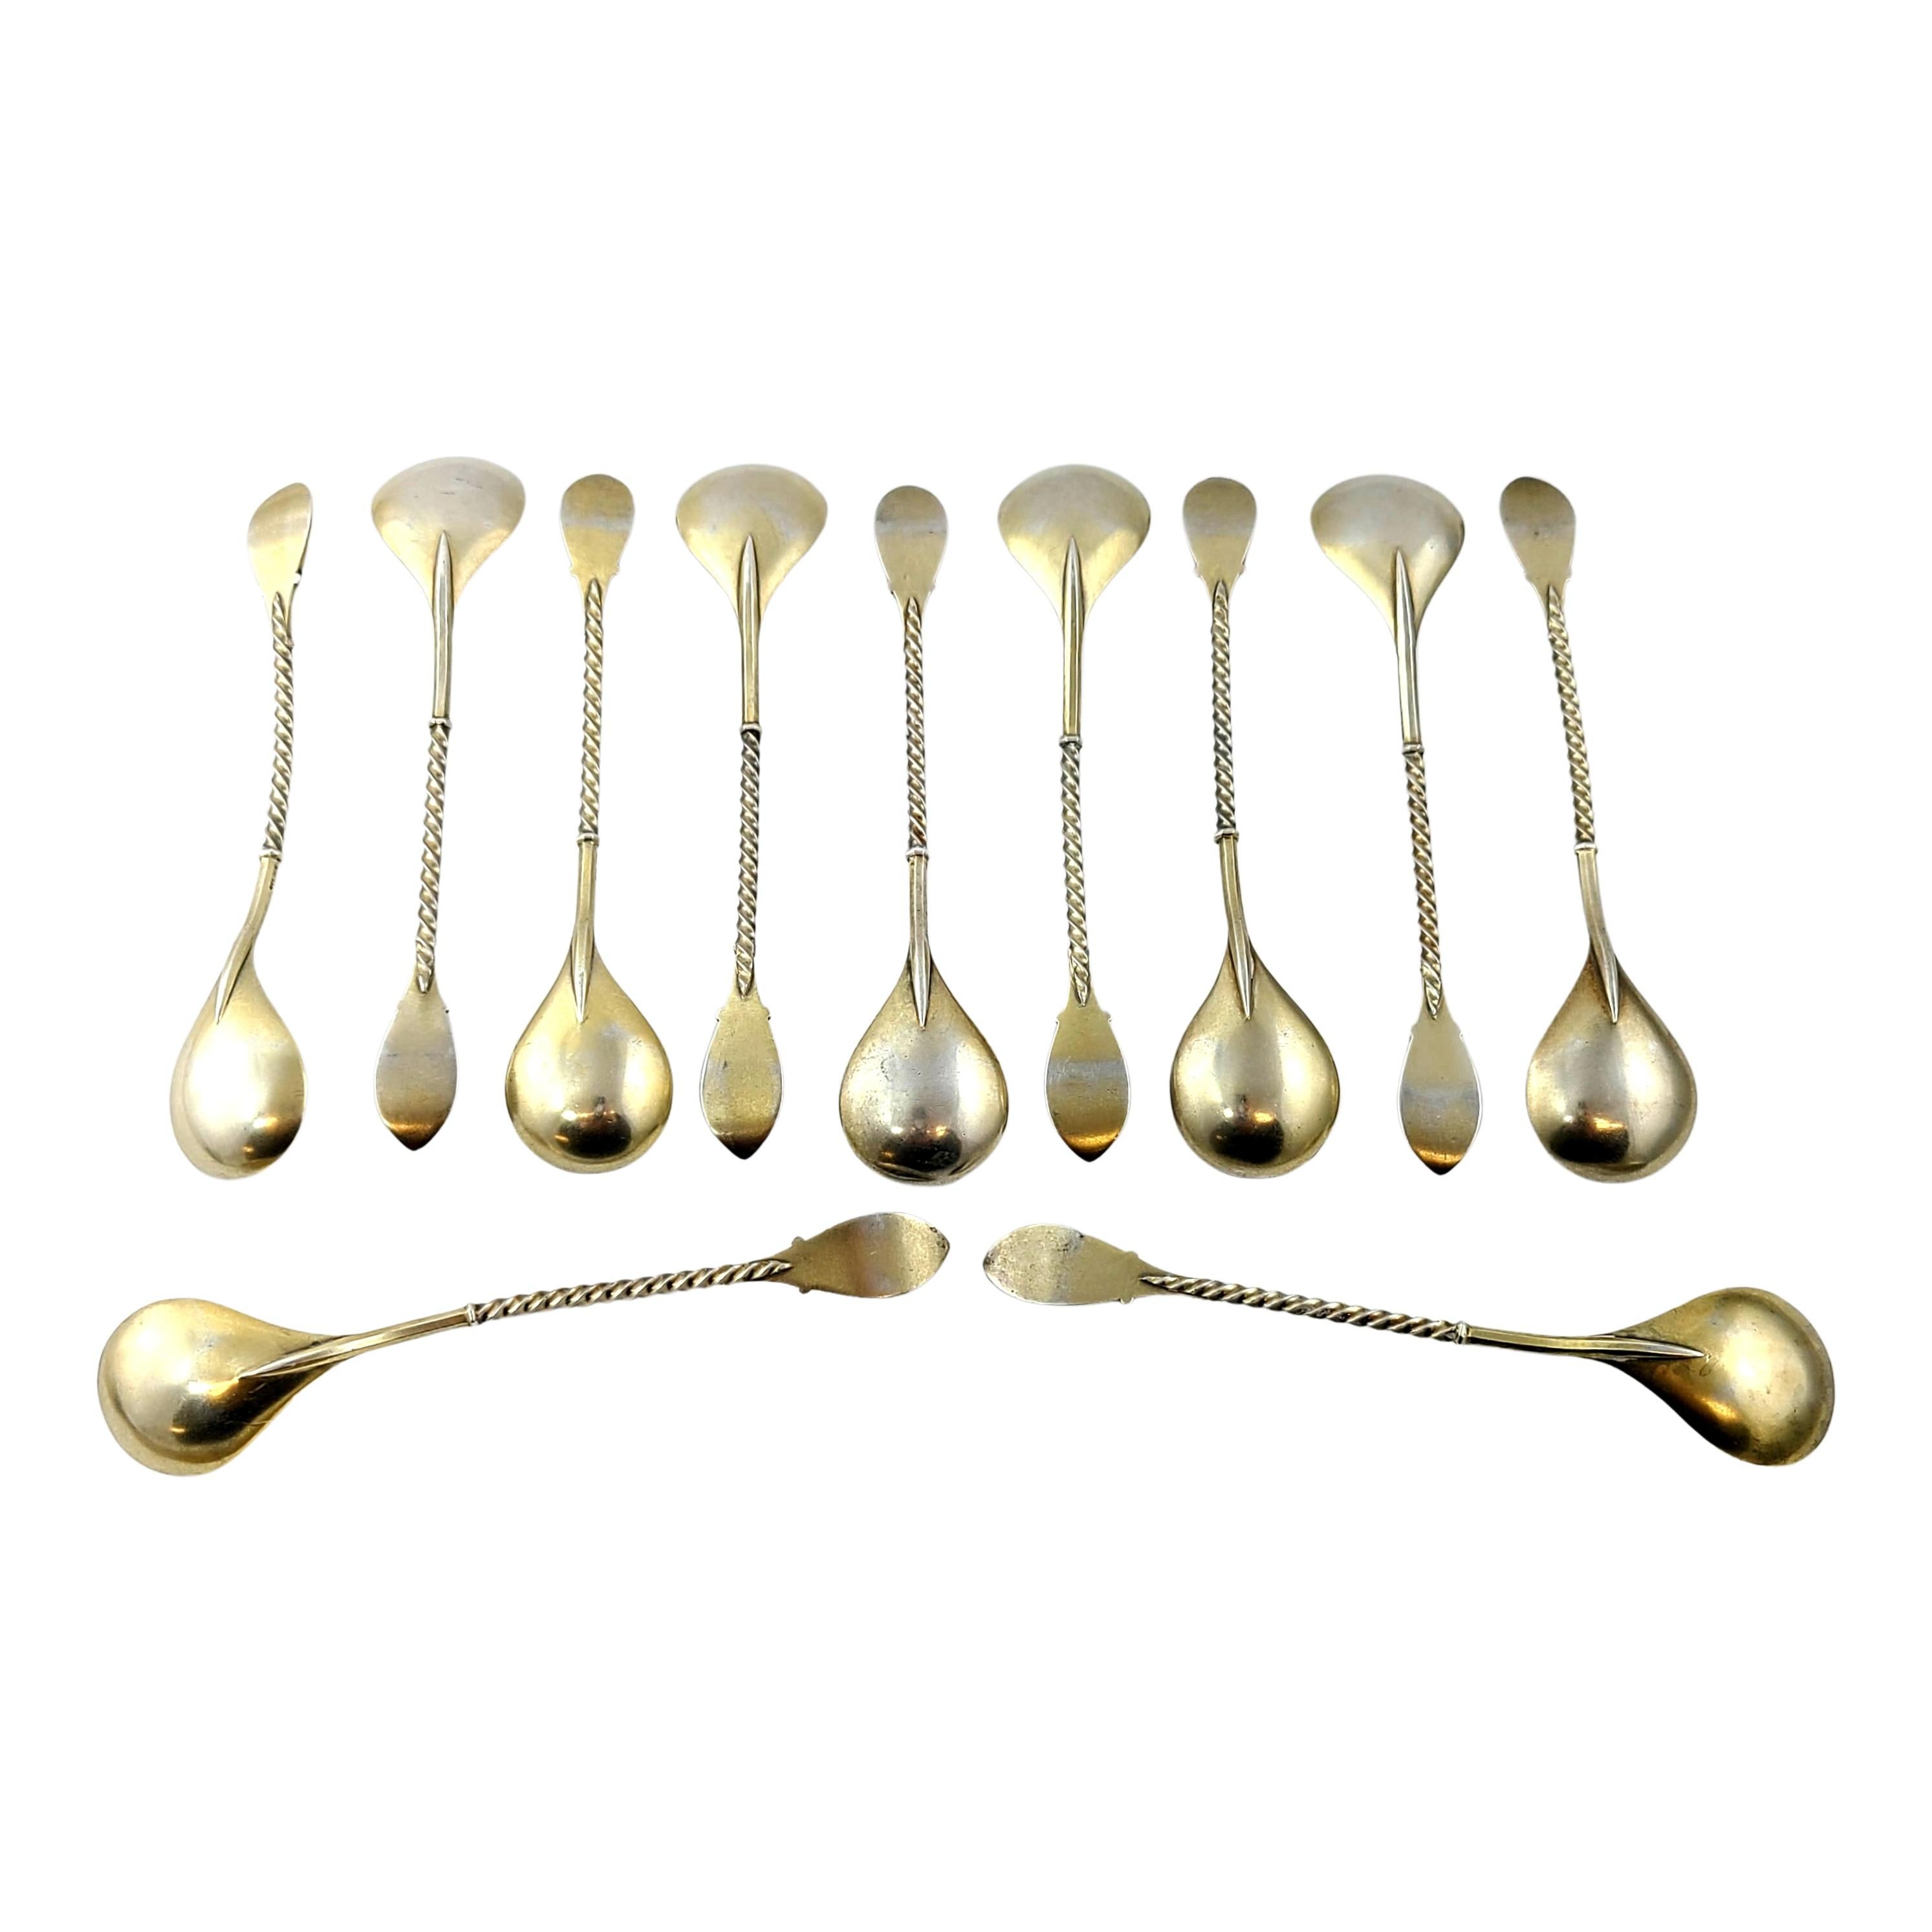 Set of 11 gold gilt over sterling silver and enamel demitasse spoons, by David Andersen Norway.

Gold gilt over sterling silver spoons with a teardrop shaped bowl, beautifully enameled in a blue and white floral design atop each twist design